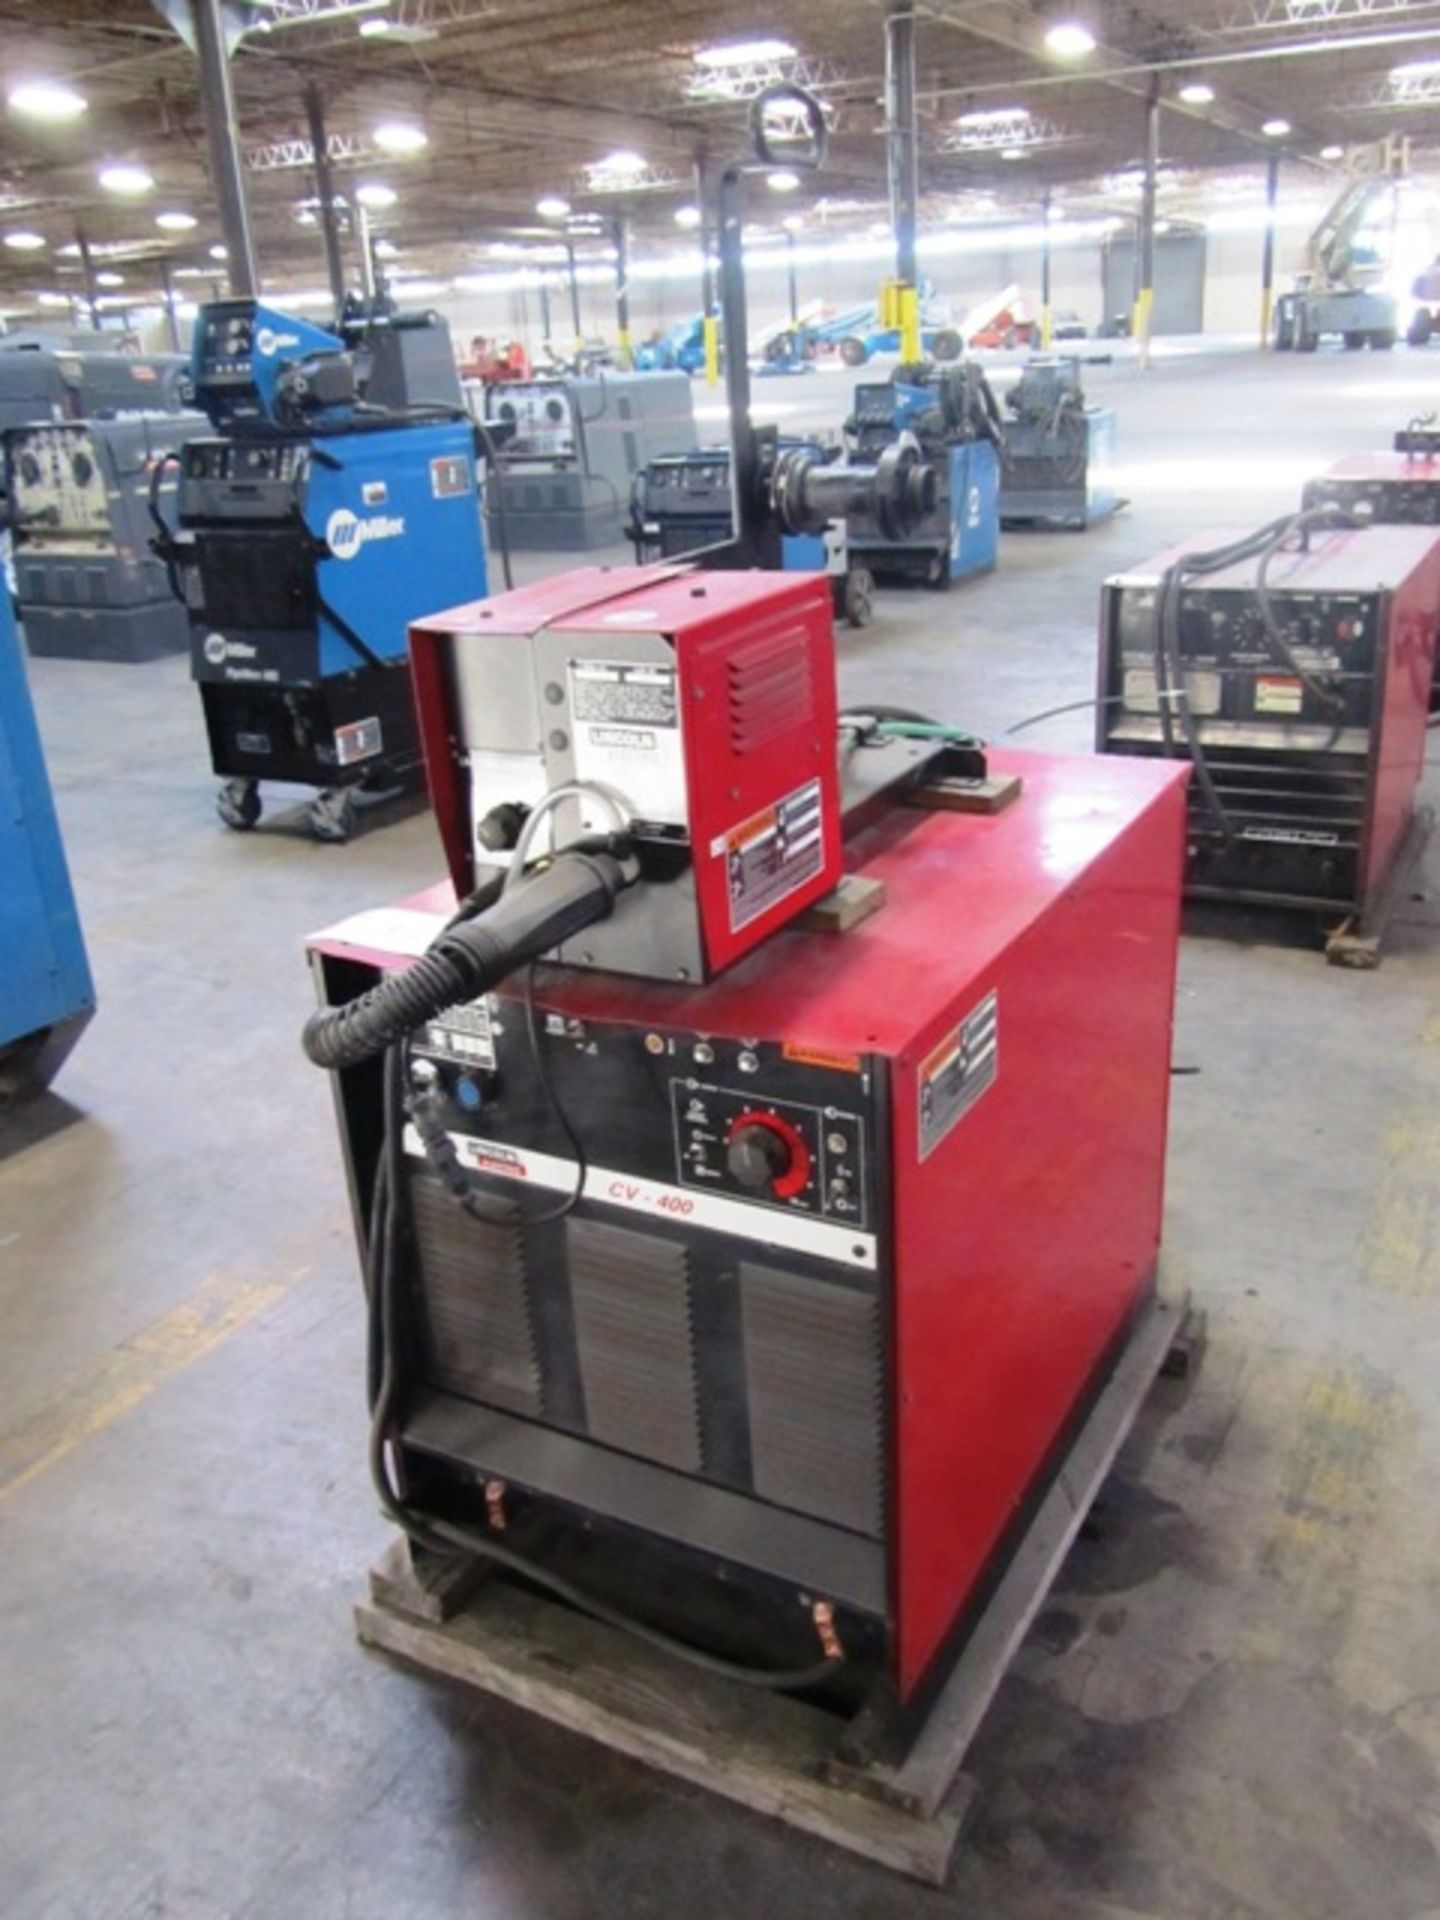 Lincoln CV400 400 Amp Mig Welder with Lincoln Electric LN-7 Wire Feeder, sn:U1970104619